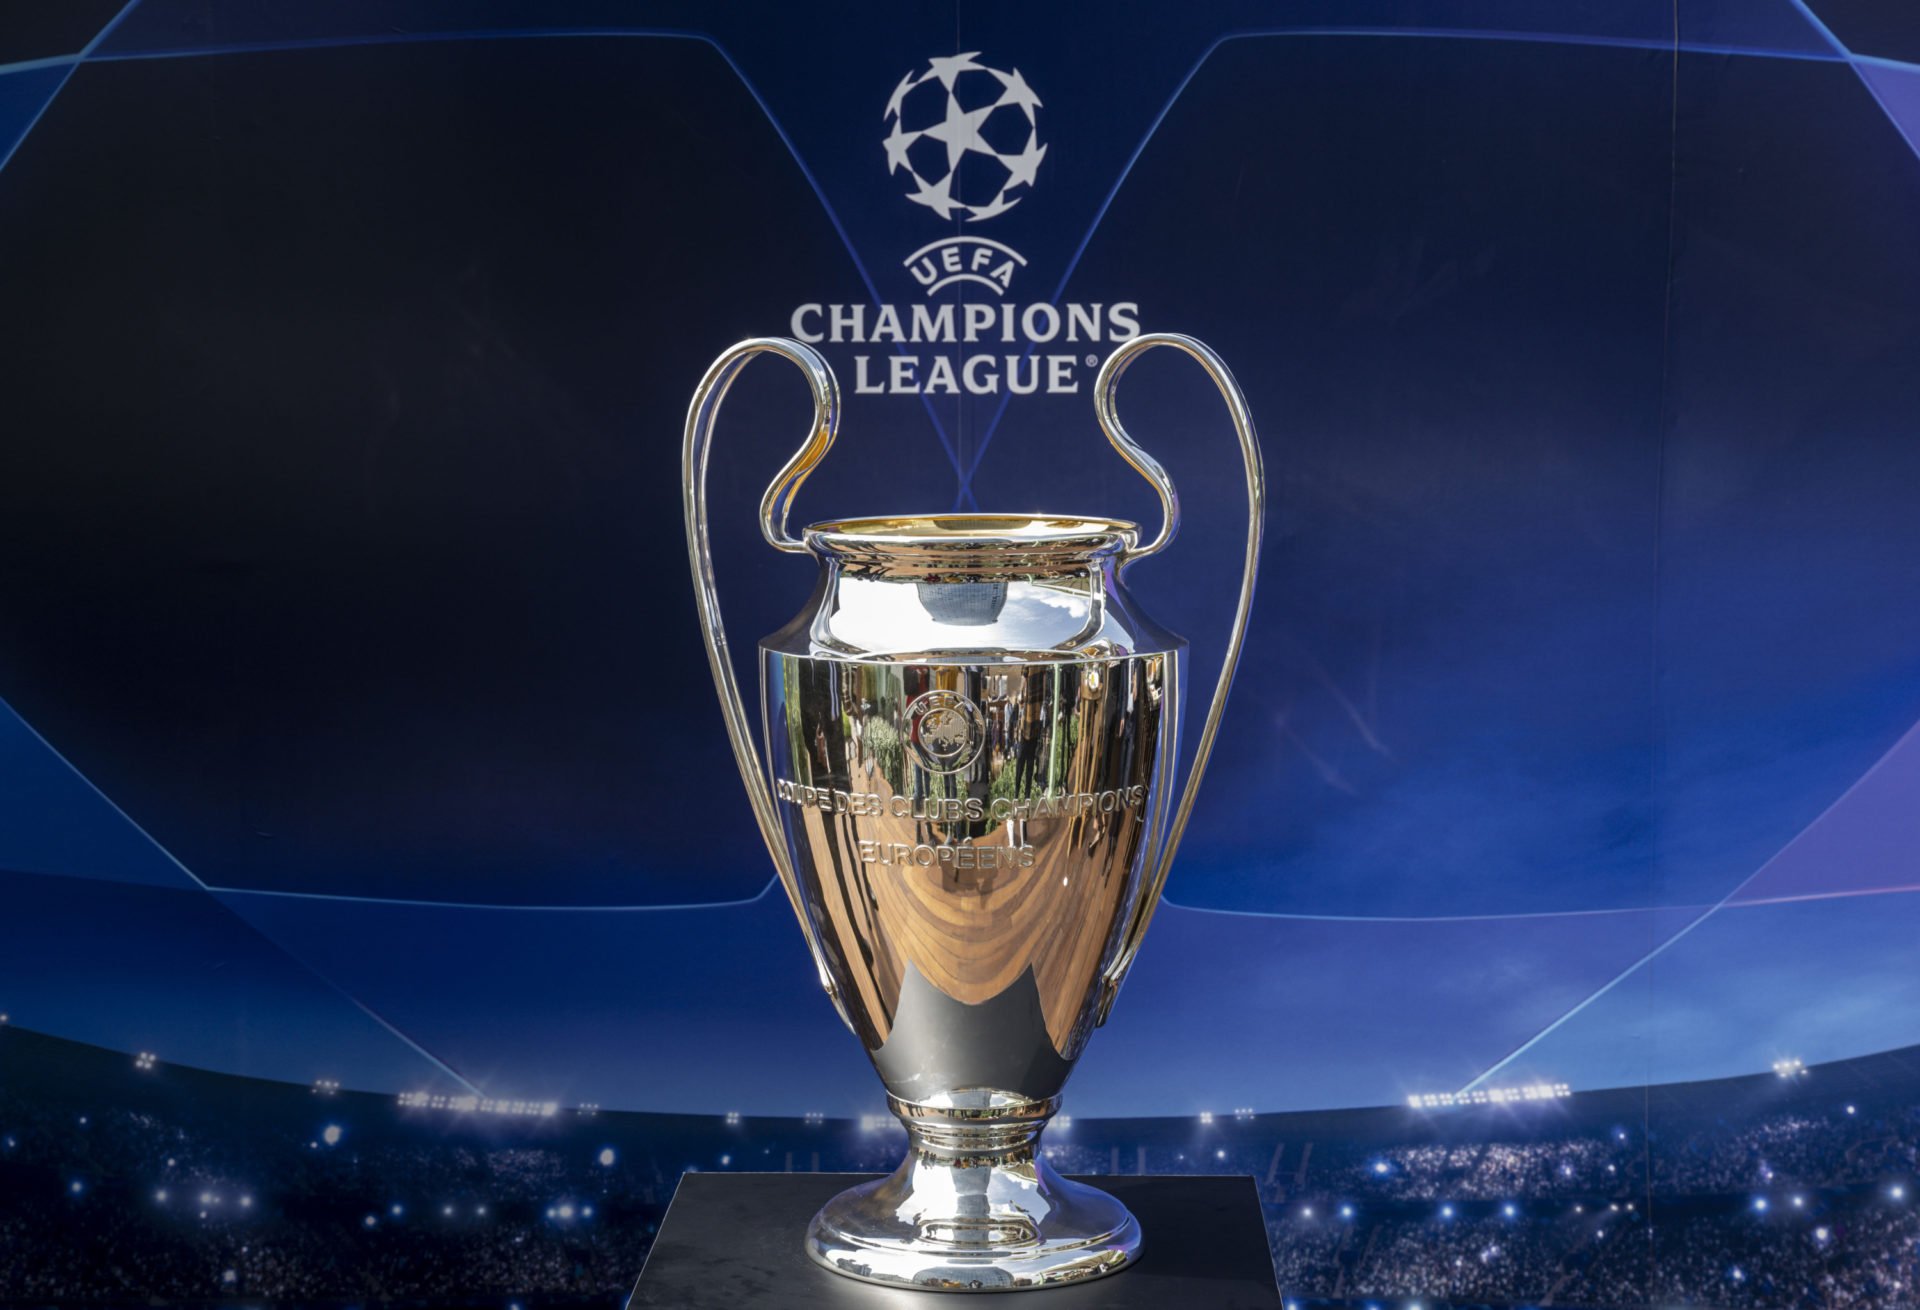 Champions League format: How it will work from 2024-25 - ESPN